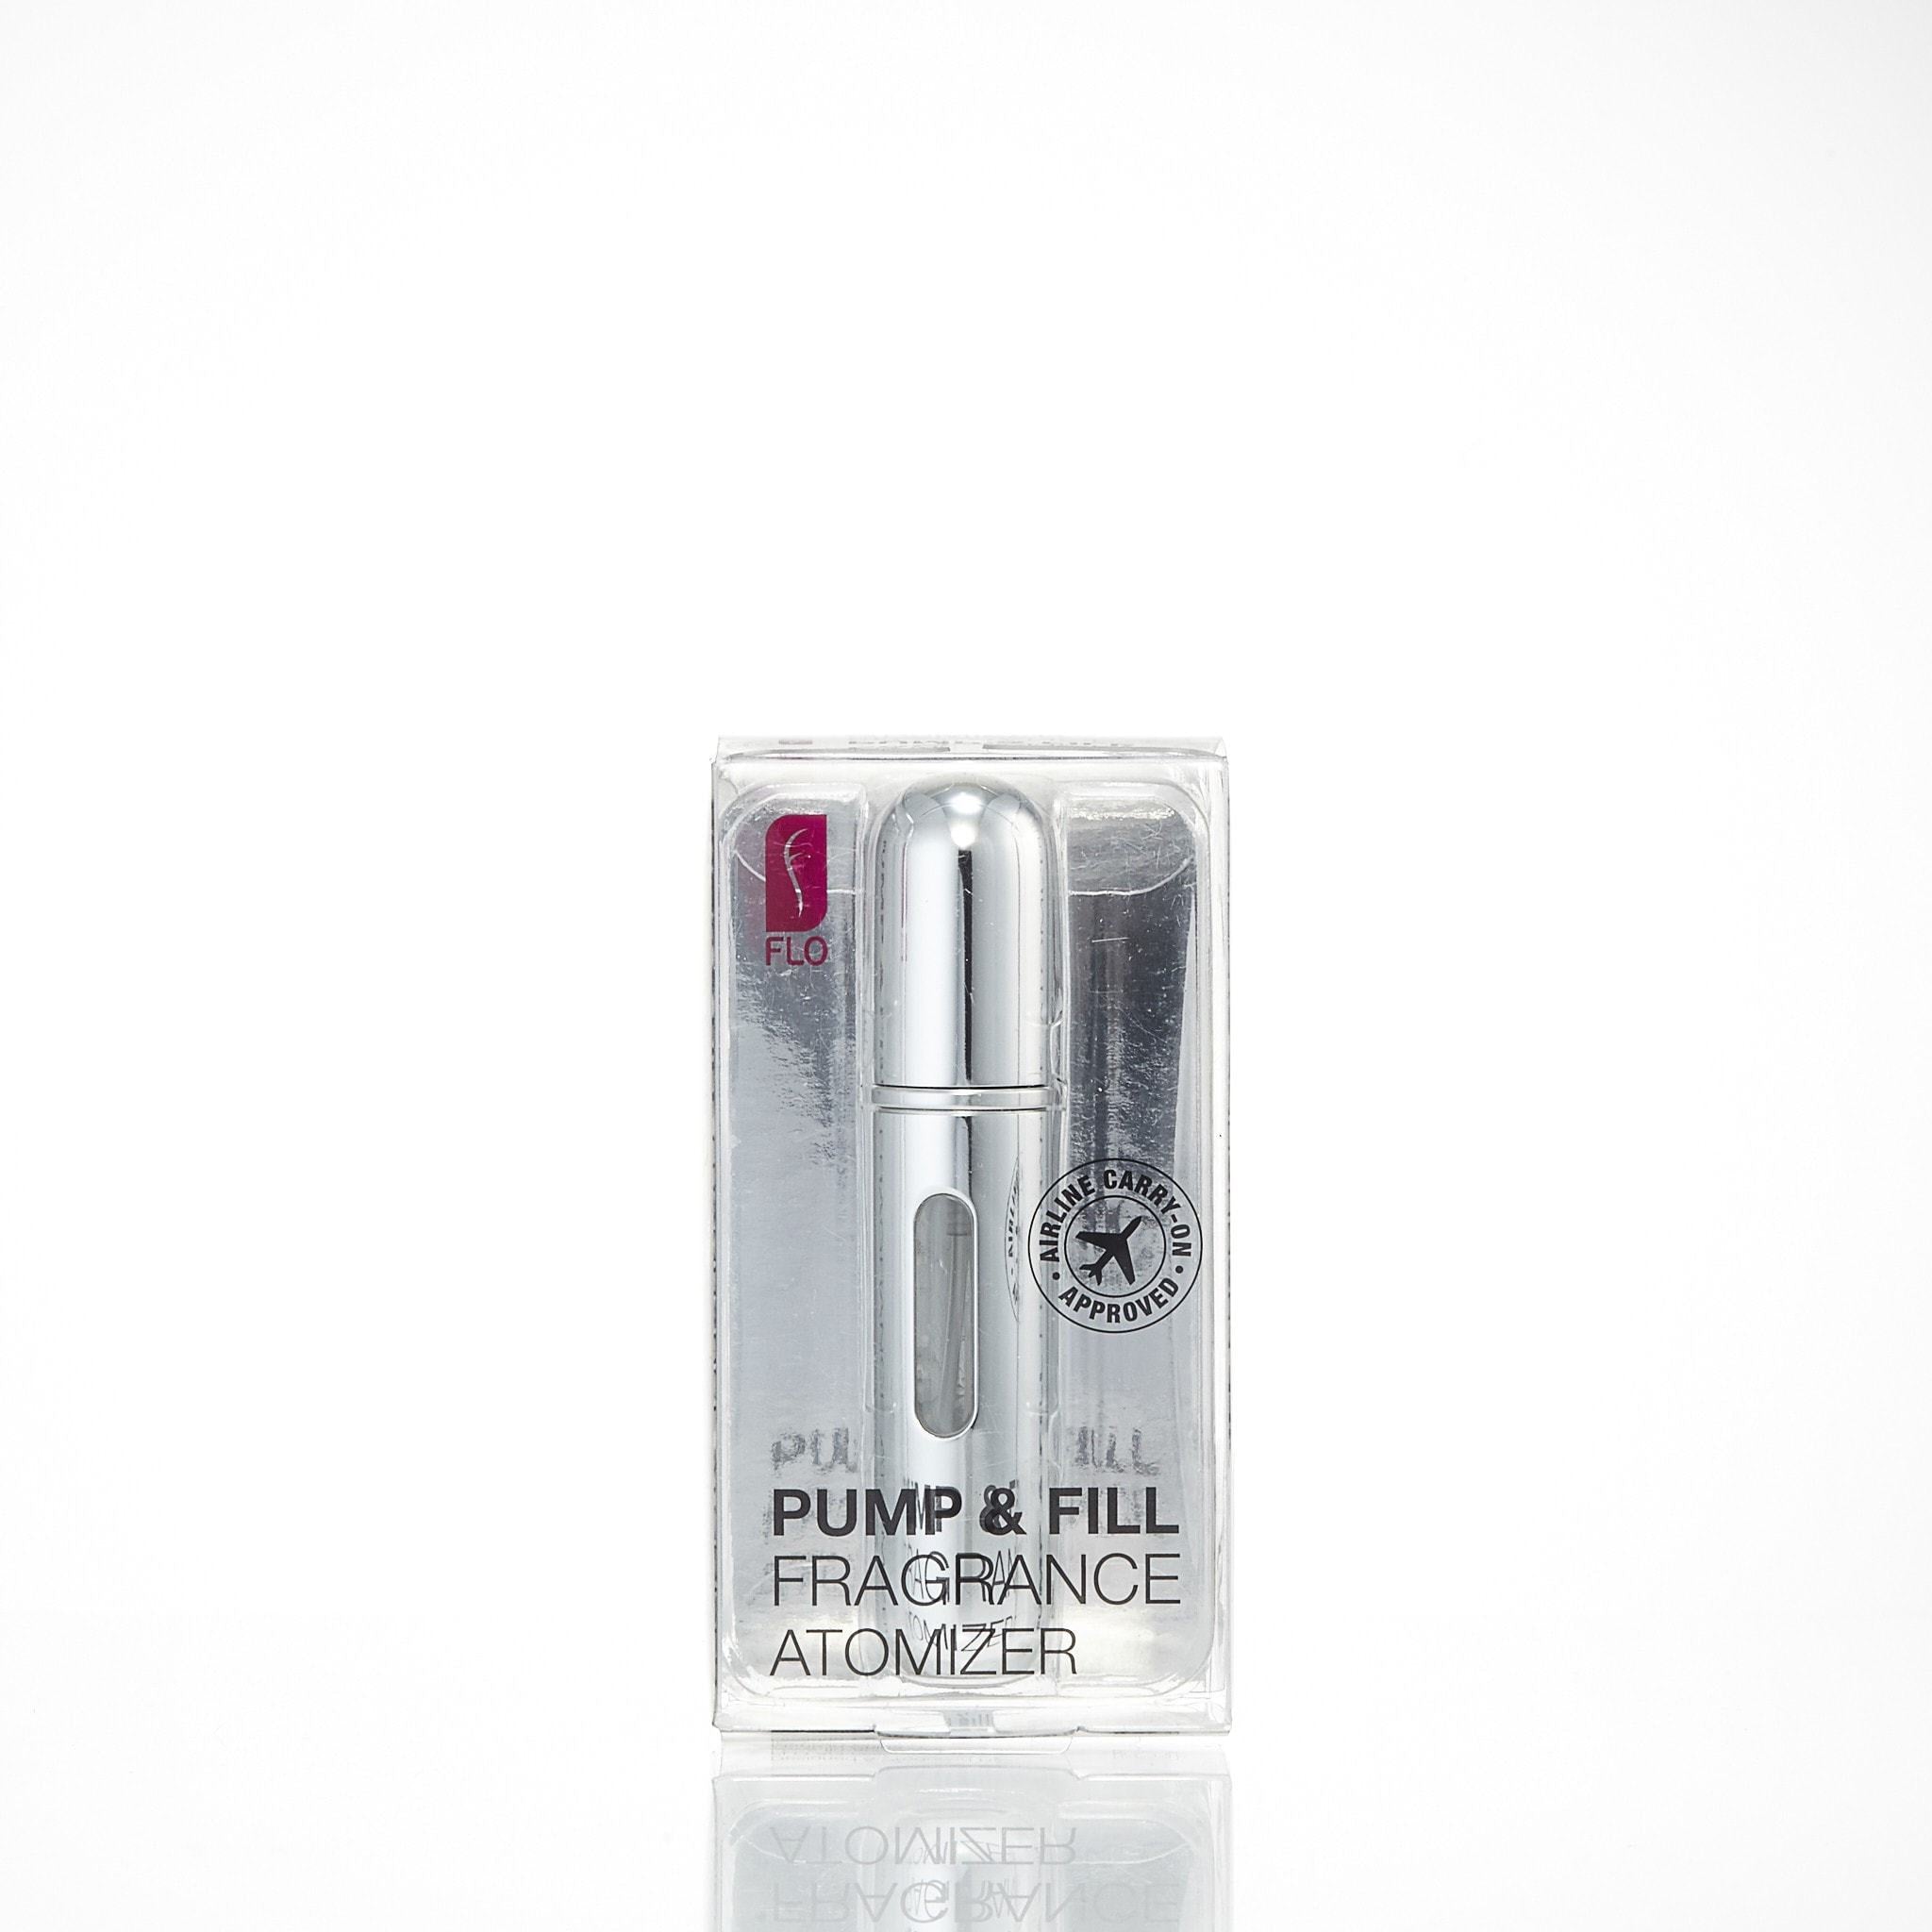 by Flo Atomizer Perfumania Pump and Fill Fragrance –